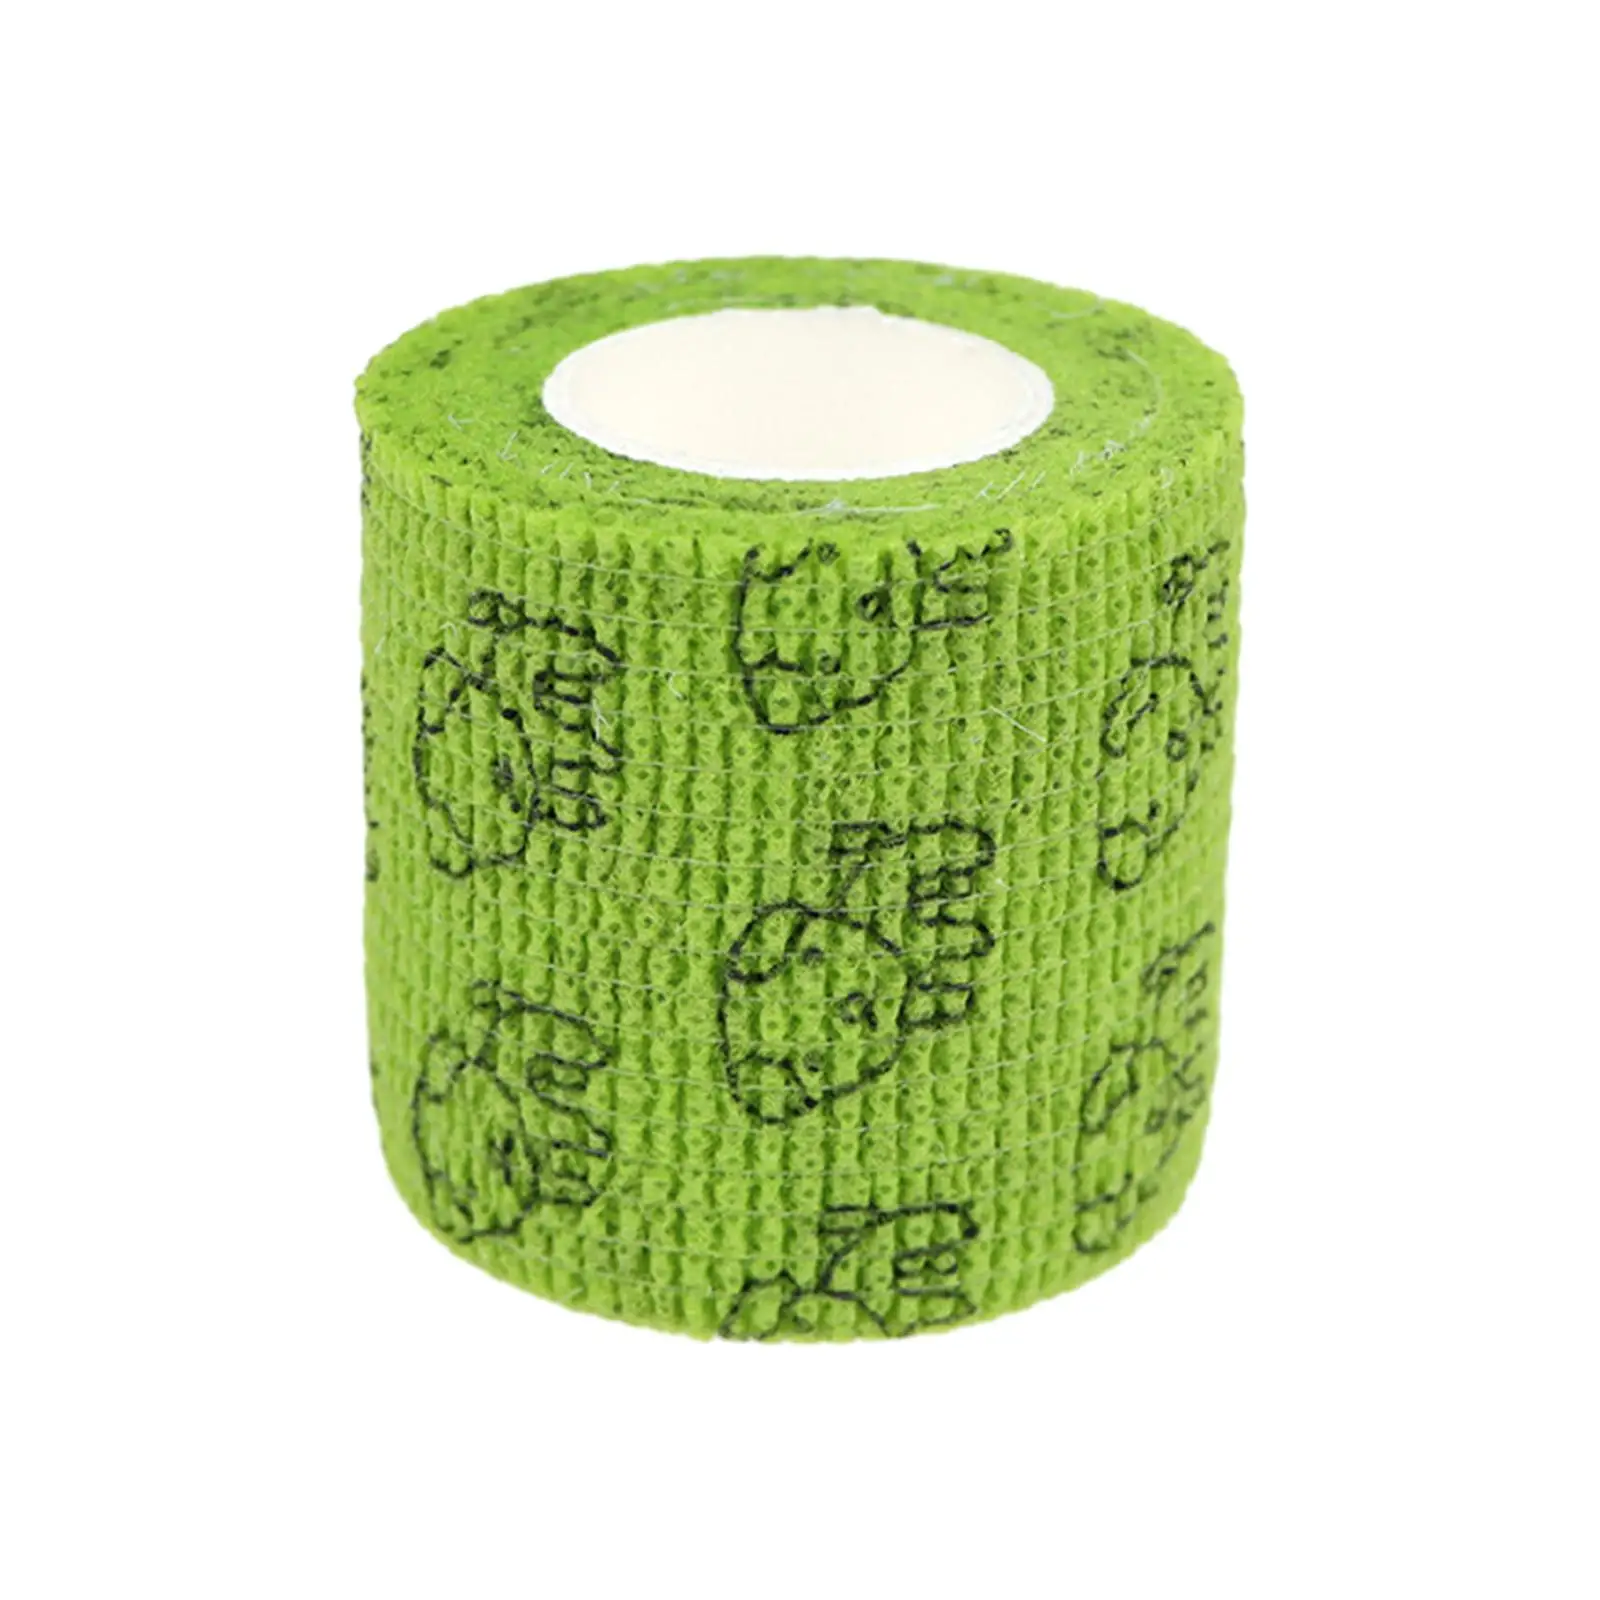 Self Adhesive Elastic Bandage Multi Function Width 2.5cm Sports Wrap Tape for Small Animal Finger Palm Shoulder Workout